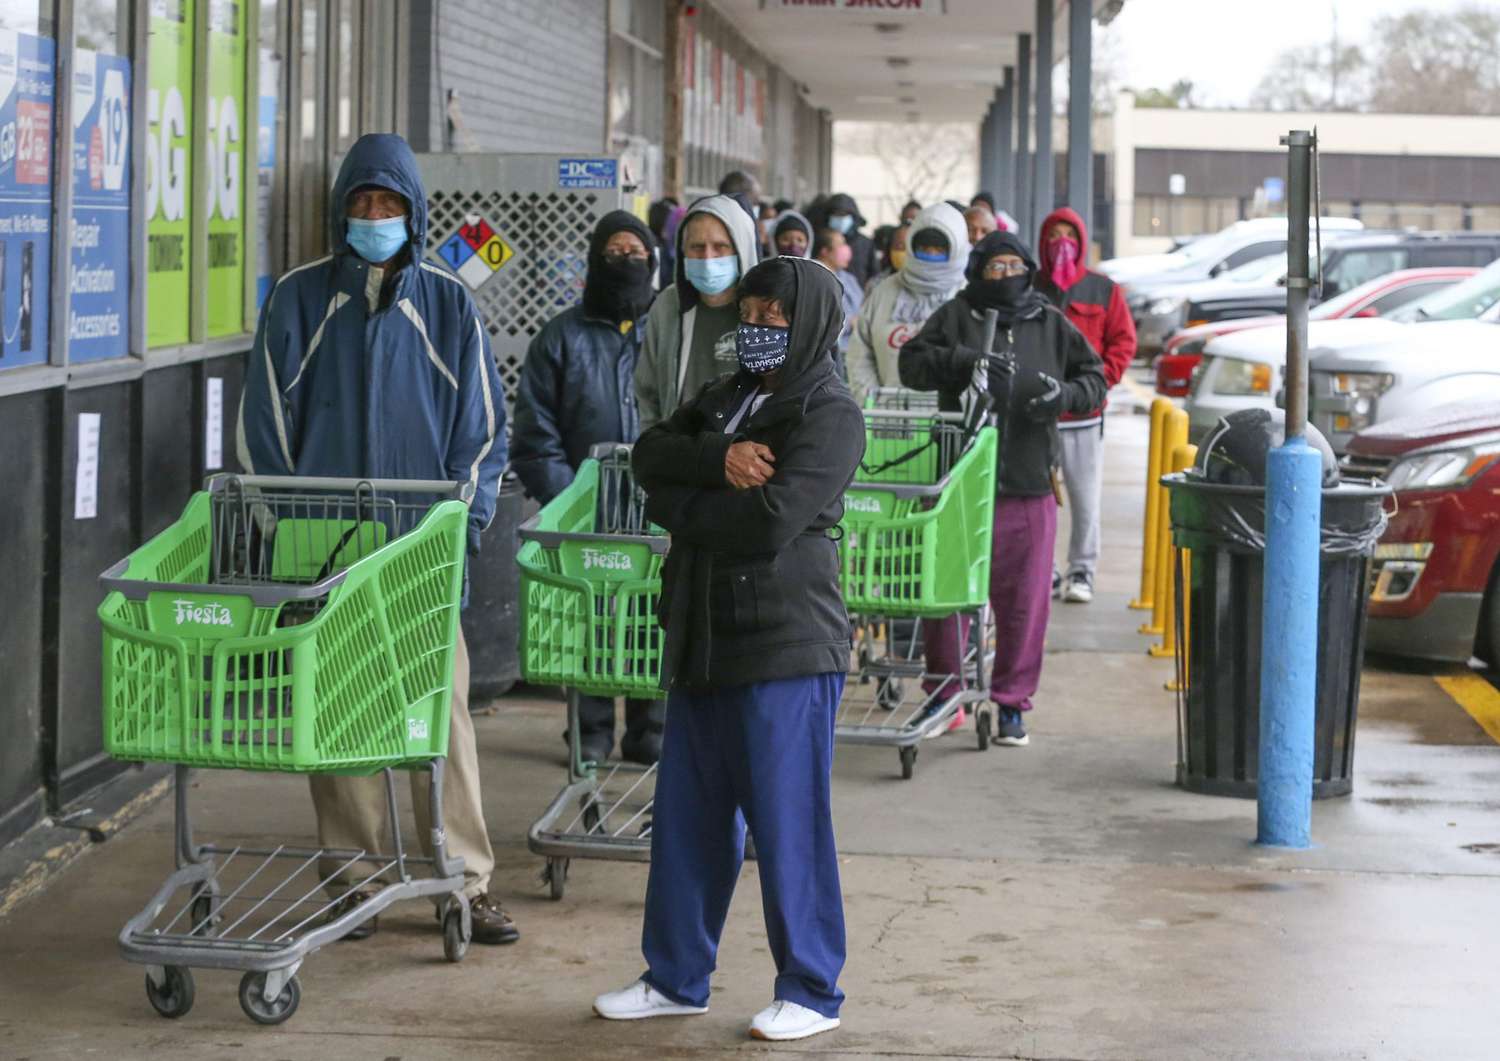 An image of people waiting in line to enter a grocery store in Texas.